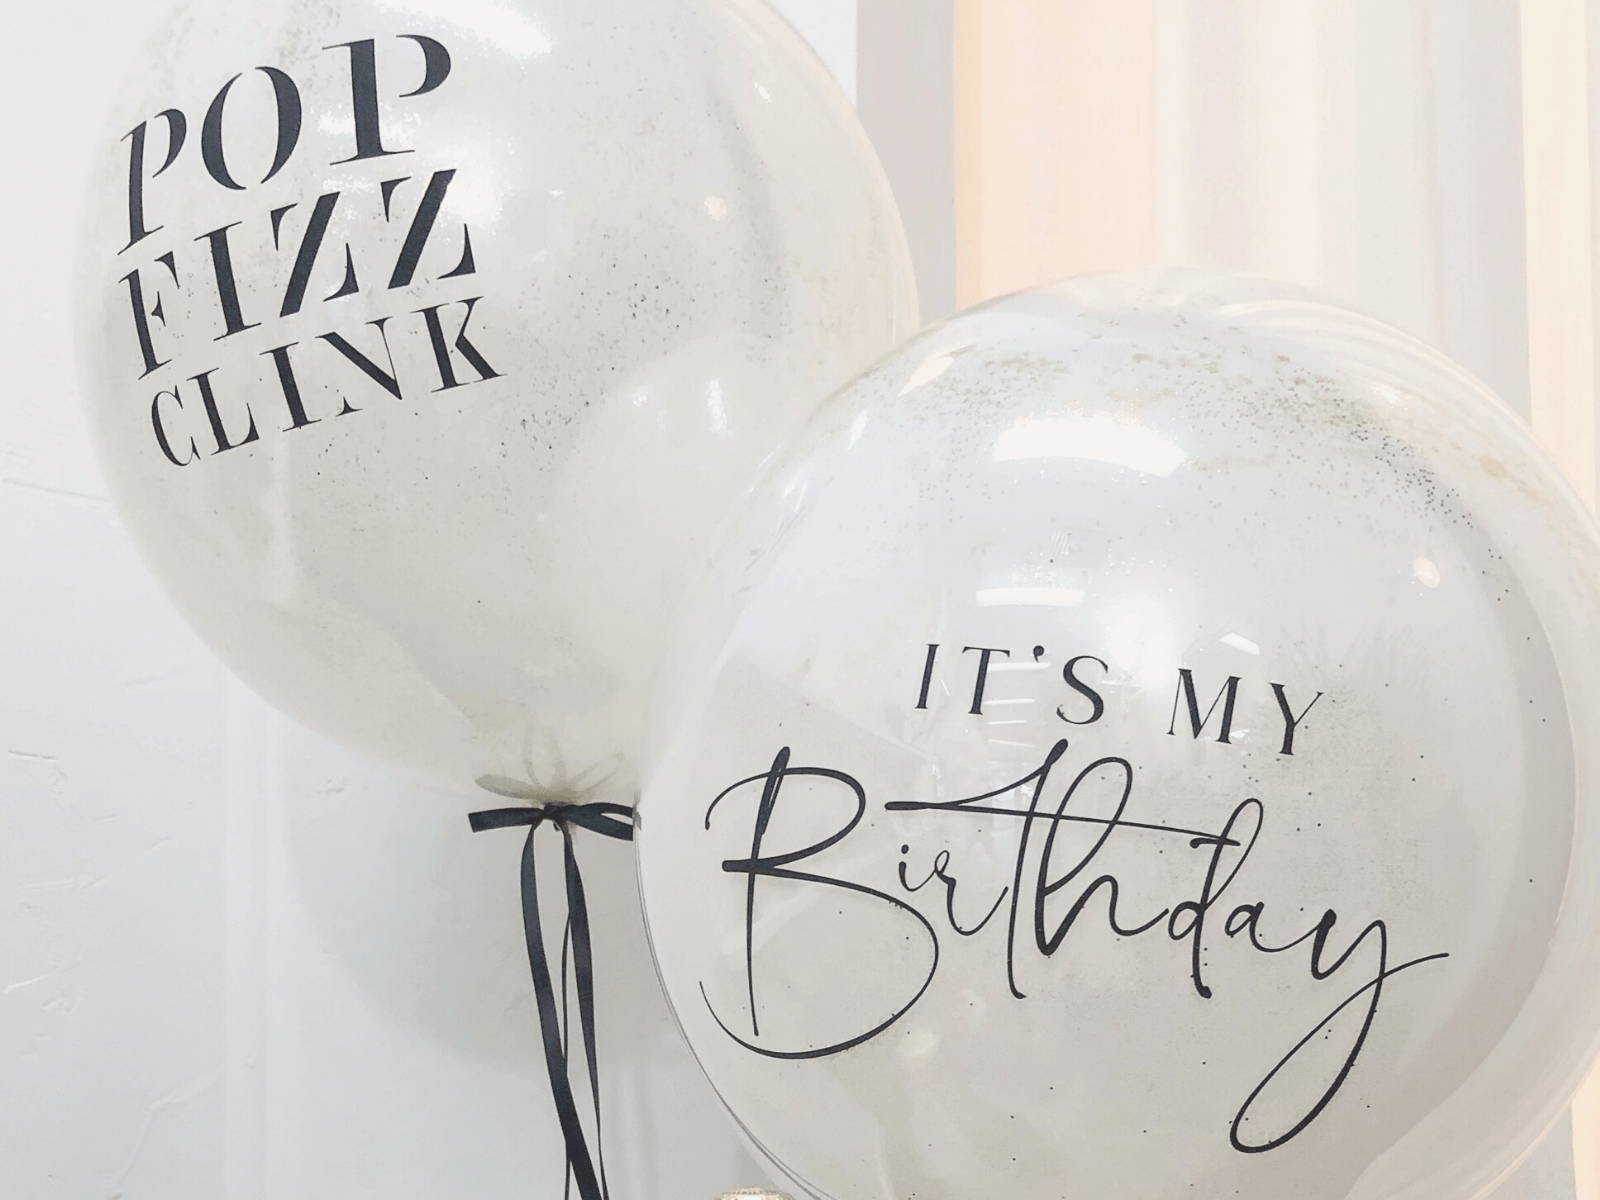 Where to buy personalised balloons with name on them in Newcastle? Shop all Personalised helium balloons in Newcastle and Lake Macquarie